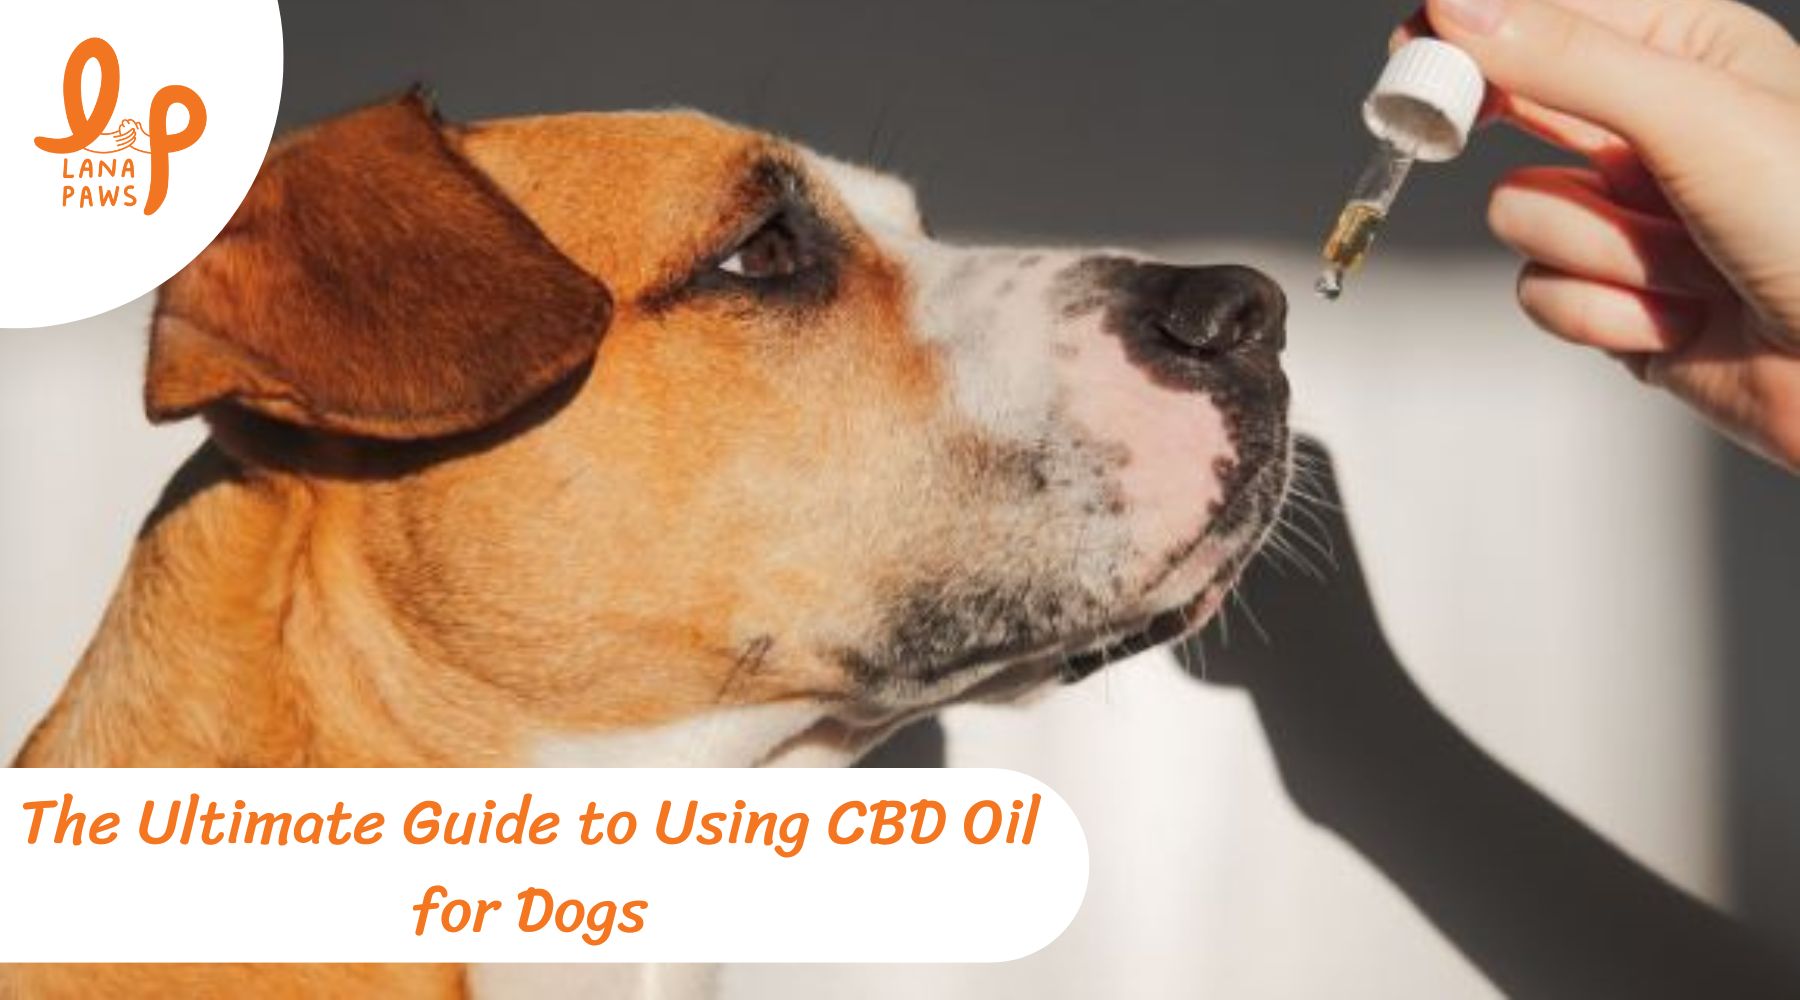 Everything You Need to Know About CBD Oil for Dogs